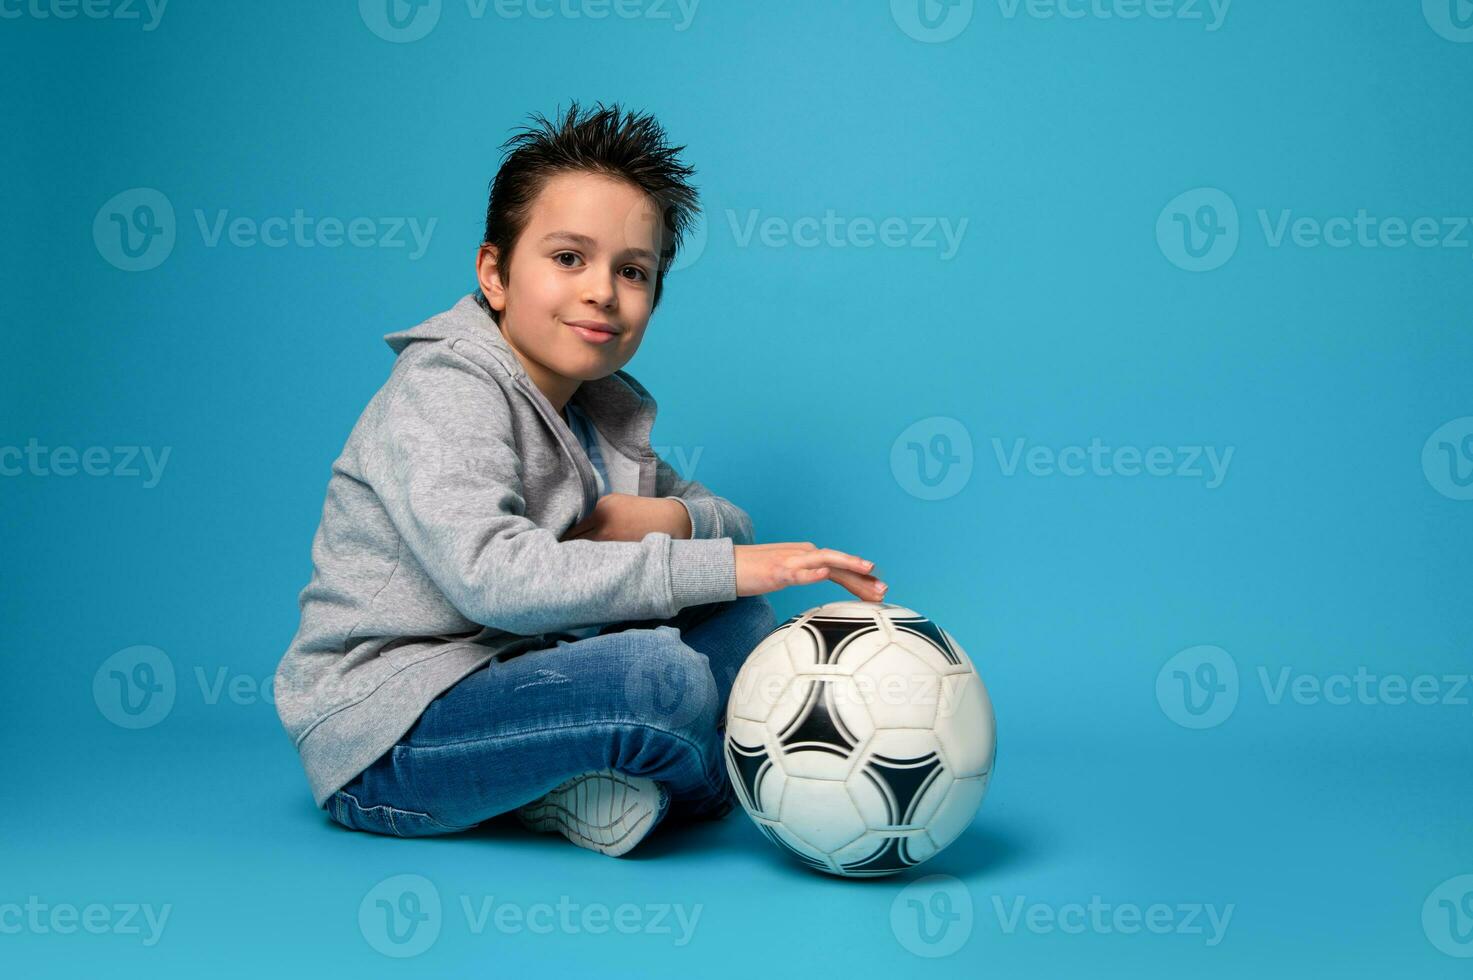 Handsome child sitting near a soccer ball on blue surface photo